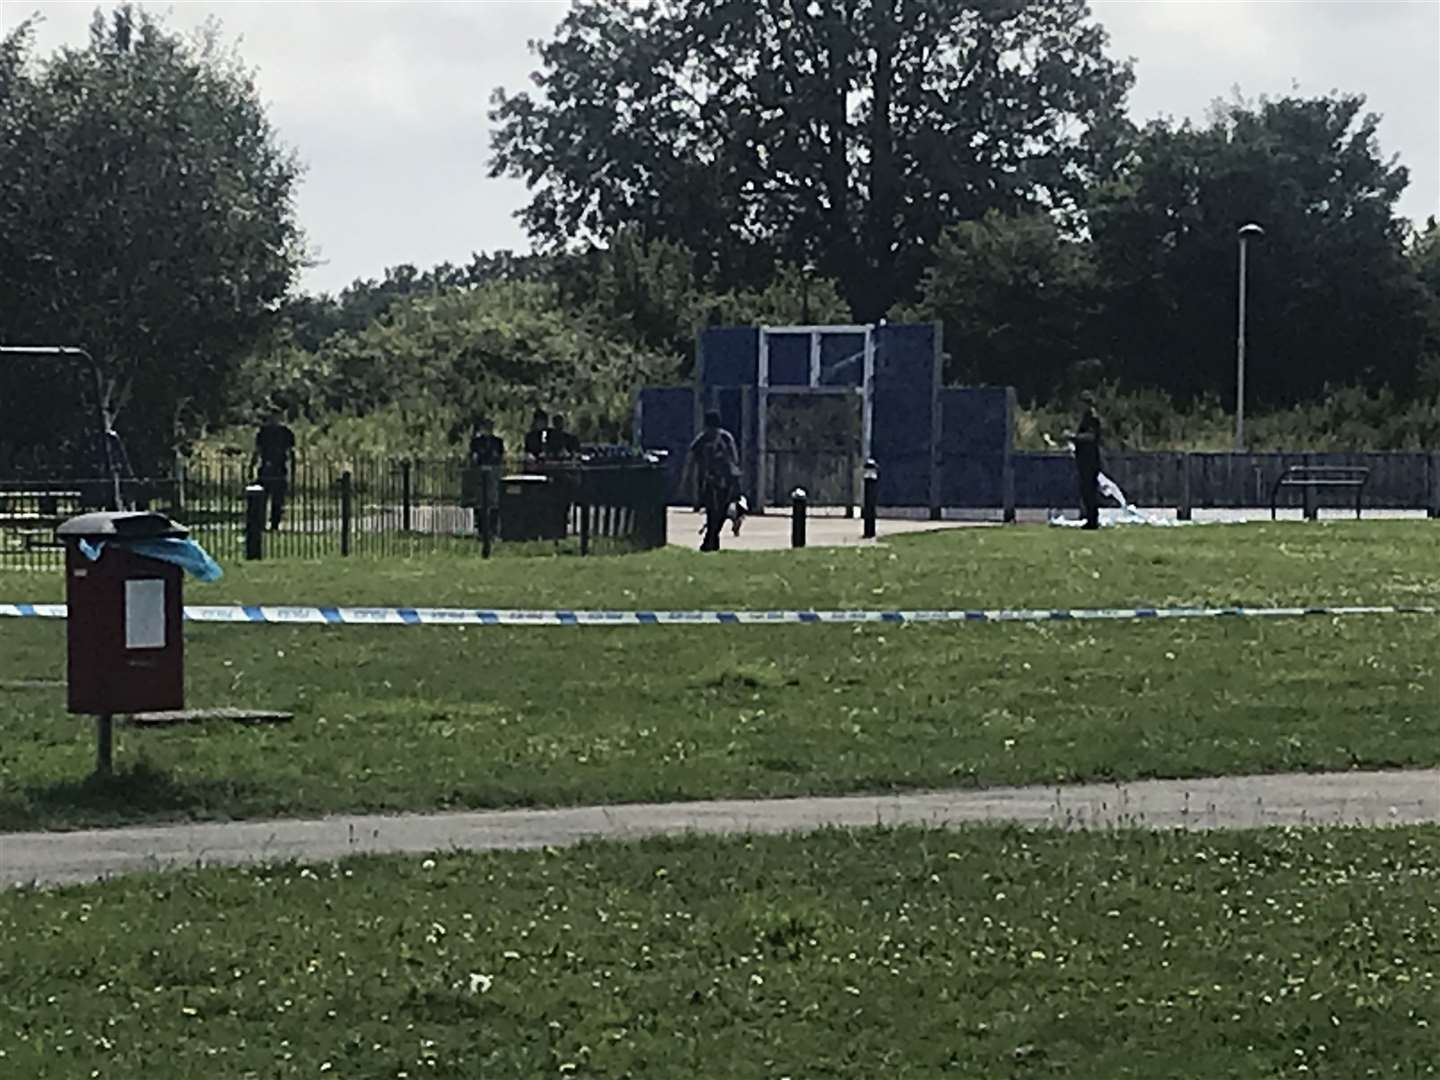 Police, some with dogs, are searching a play park this morning, near where a teen was attacked